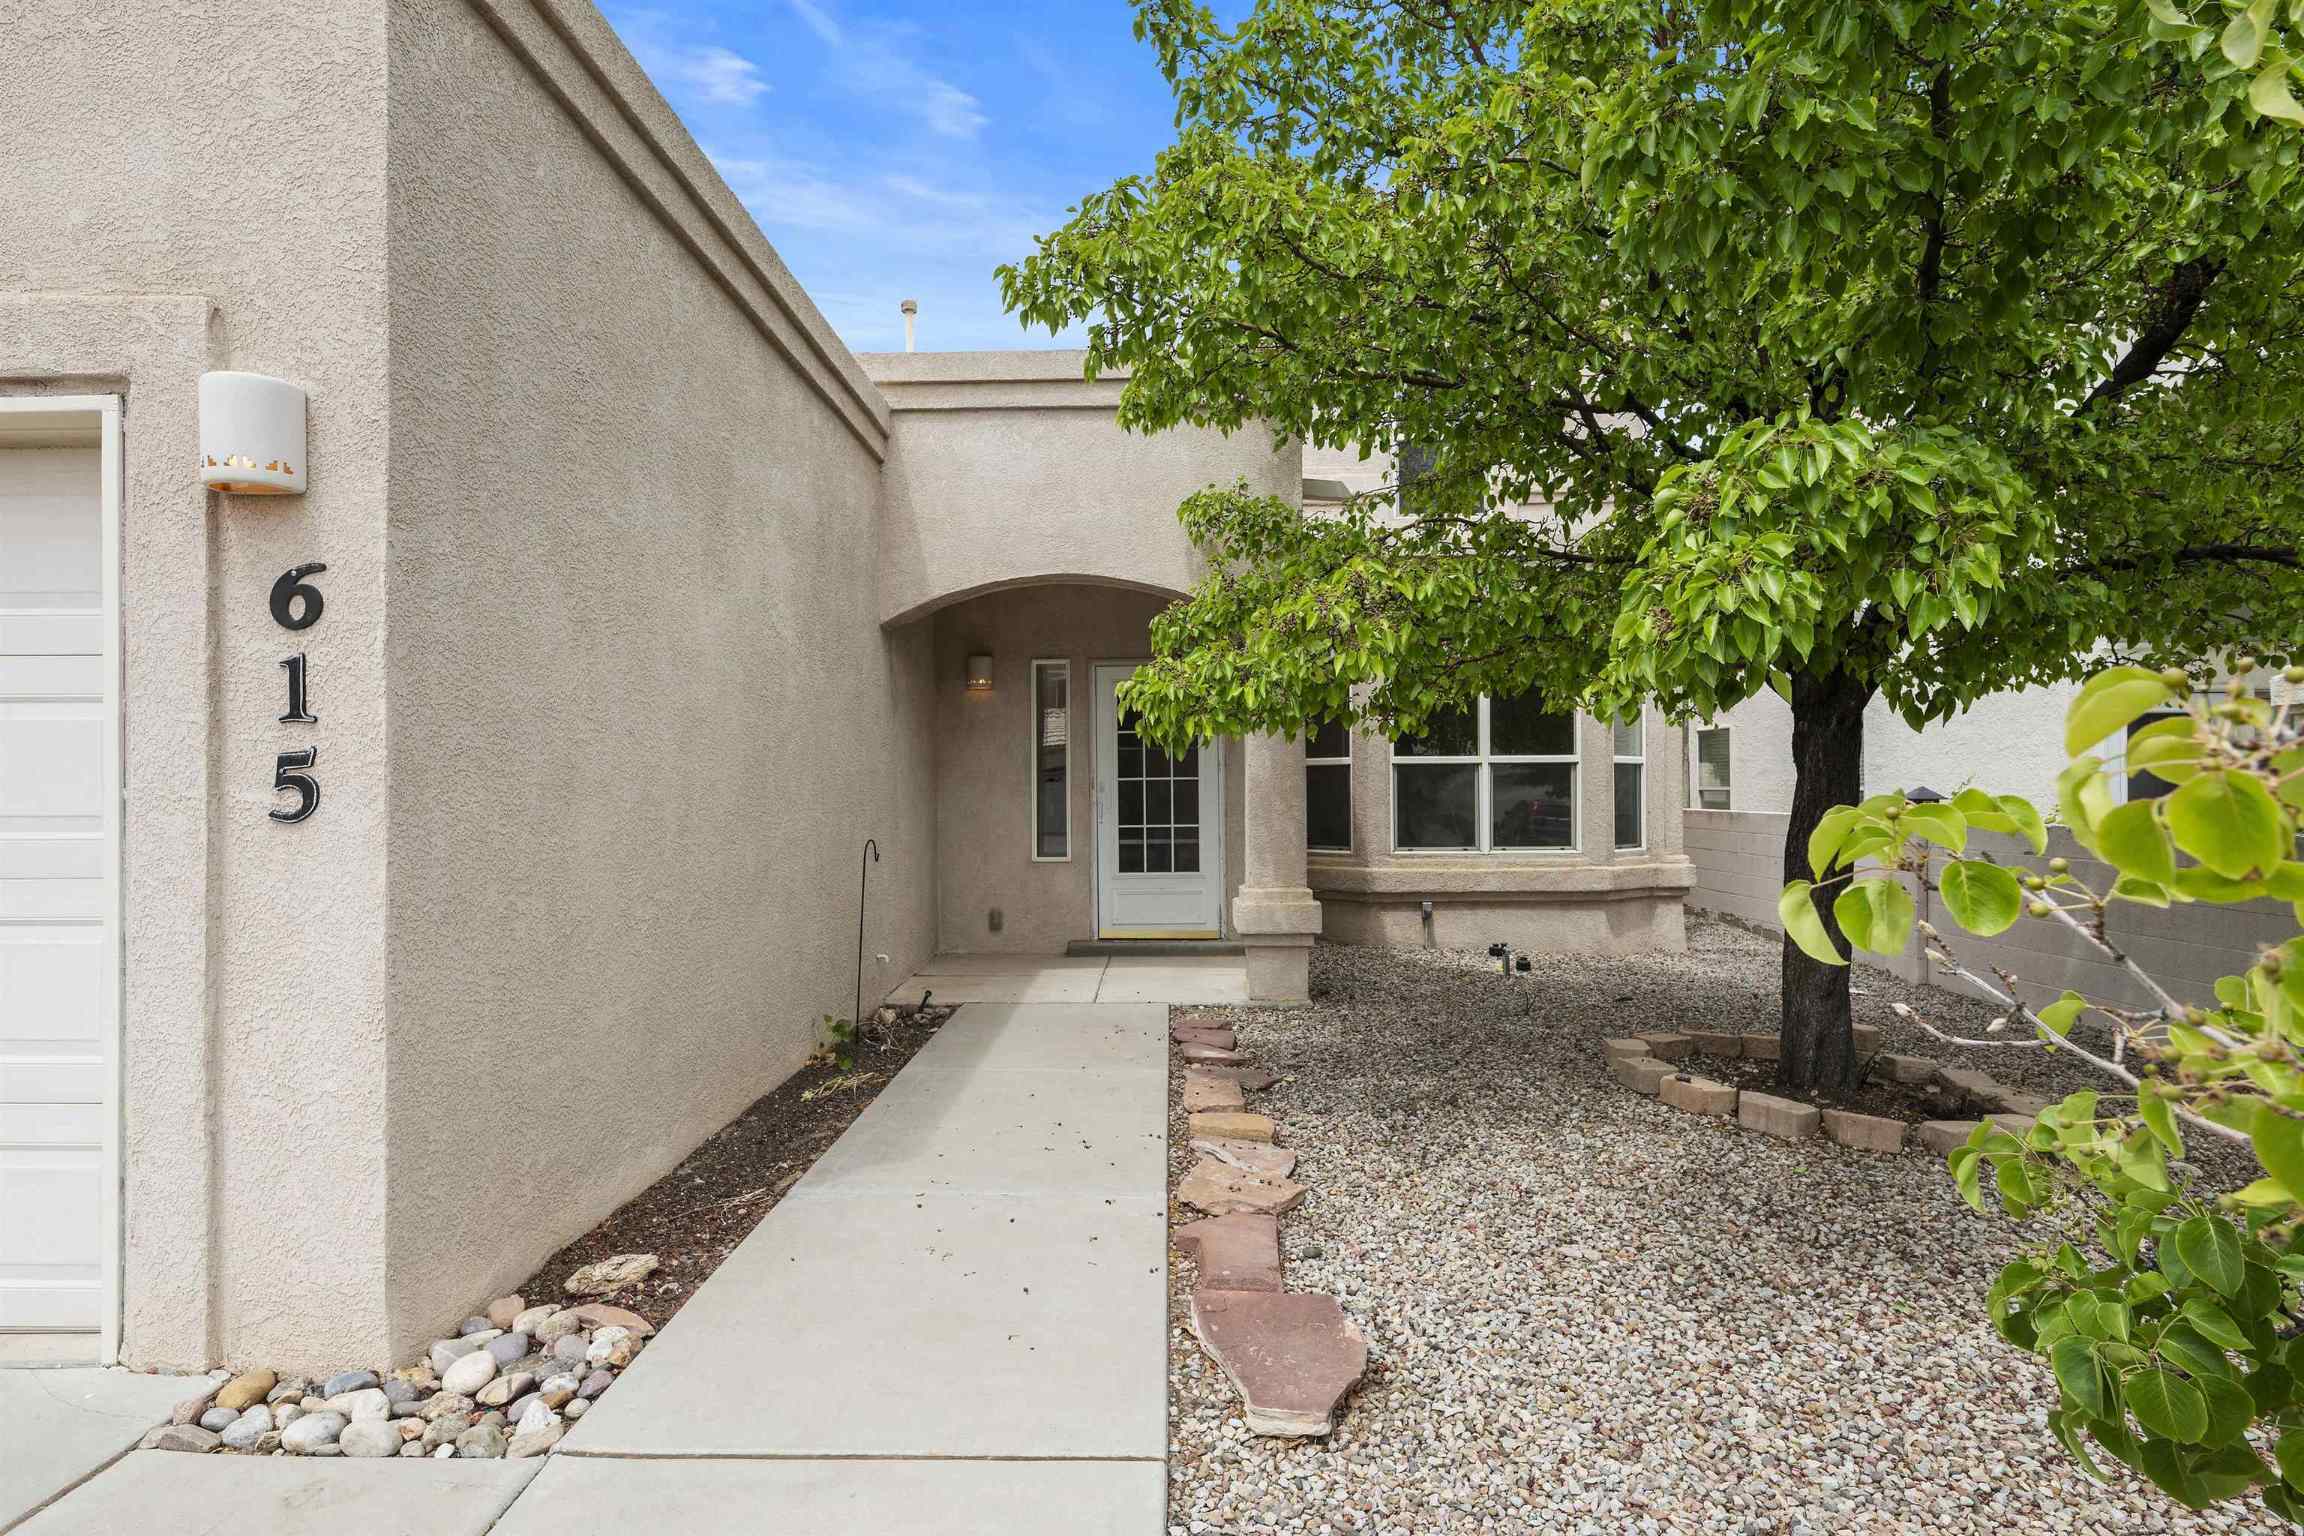 615 Hermit Falls Drive, Rio Rancho, New Mexico 87144, 4 Bedrooms Bedrooms, ,3 BathroomsBathrooms,Residential,For Sale,615 Hermit Falls Drive,202201844